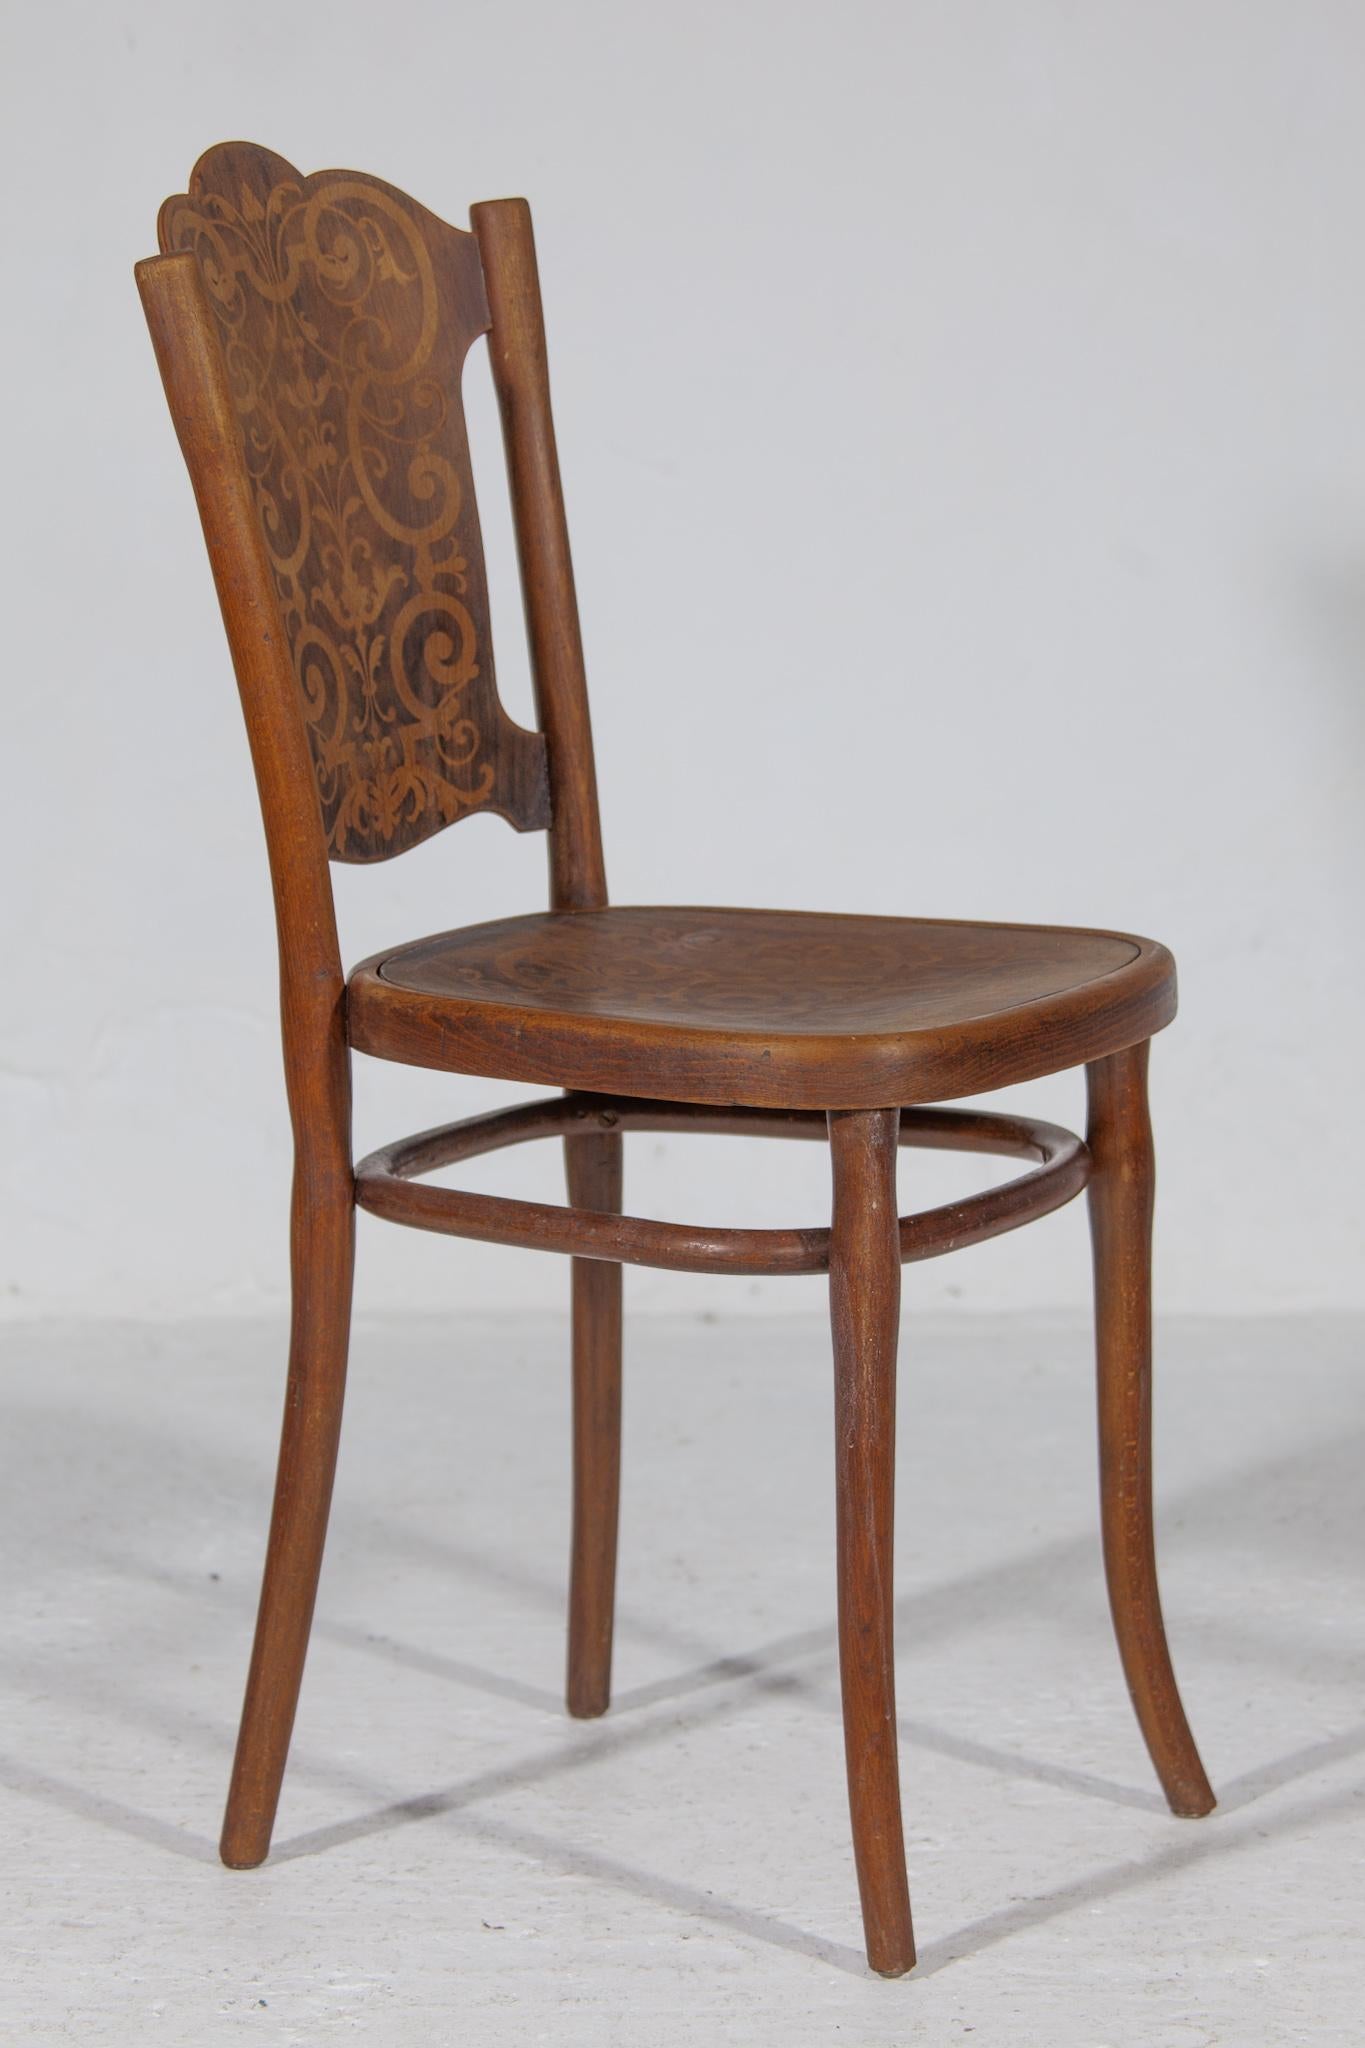 Art Nouveau Rare Set of Six Thonet Dining, Side Chairs With Flower Decor Pattern, Austria